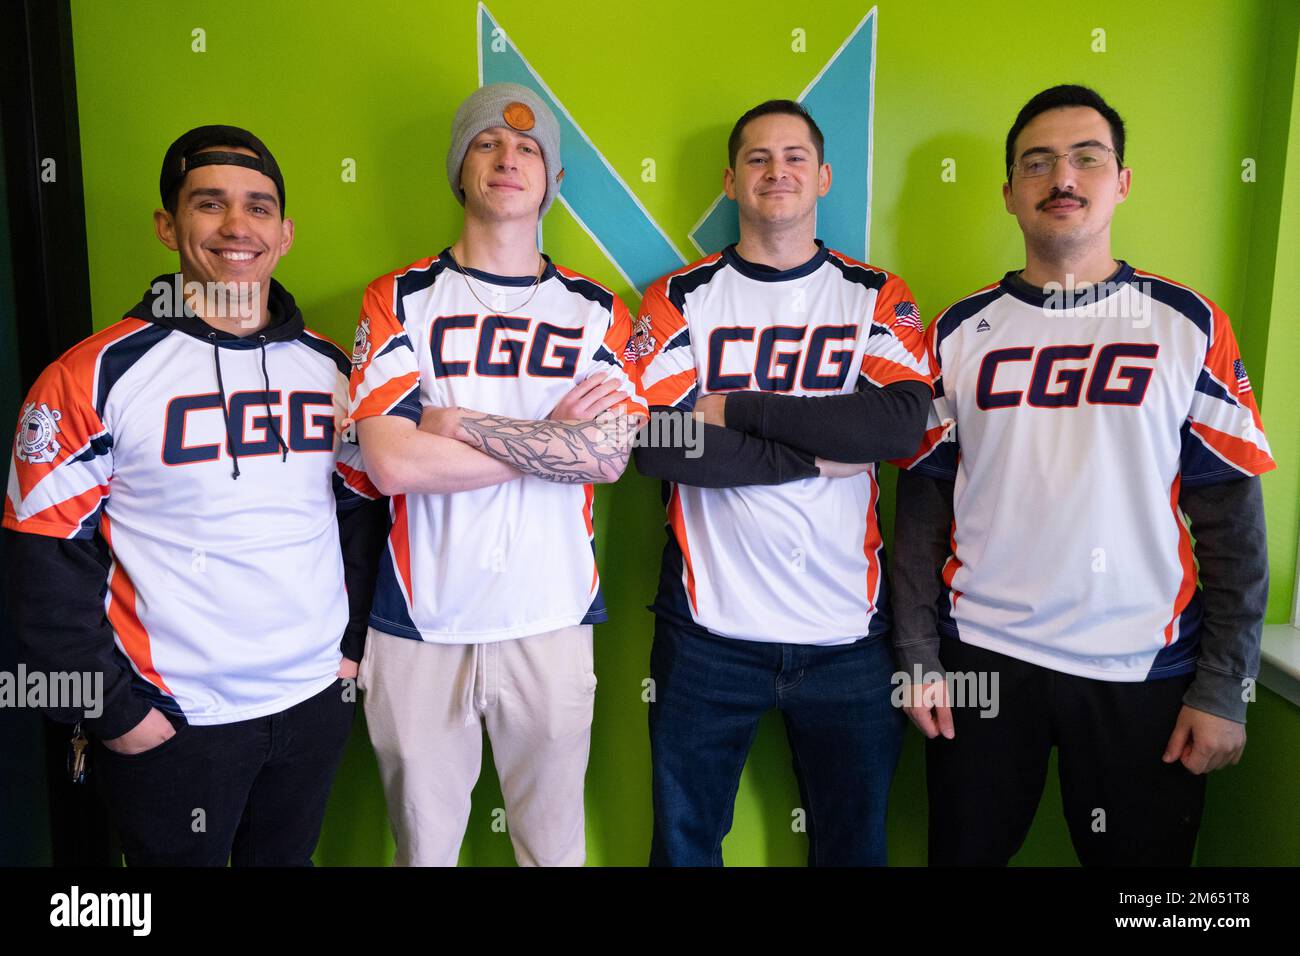 Petty Officer 2nd Class Claudio Giugliano, Petty Officer 3rd Class Reece Womick, Petty Officer 1st Class Alex Alfonso and Petty Officer 1st Class Micahel Lopez, members of the US Coast Guard Rocket League Team, pose for a team photo at Metro Esports in Warminster, Pennsylvania, April 2, 2022. The team competed in the first Coast Guard-sponsored esports event, held by Philly Esports and Metro Gaming. Stock Photo